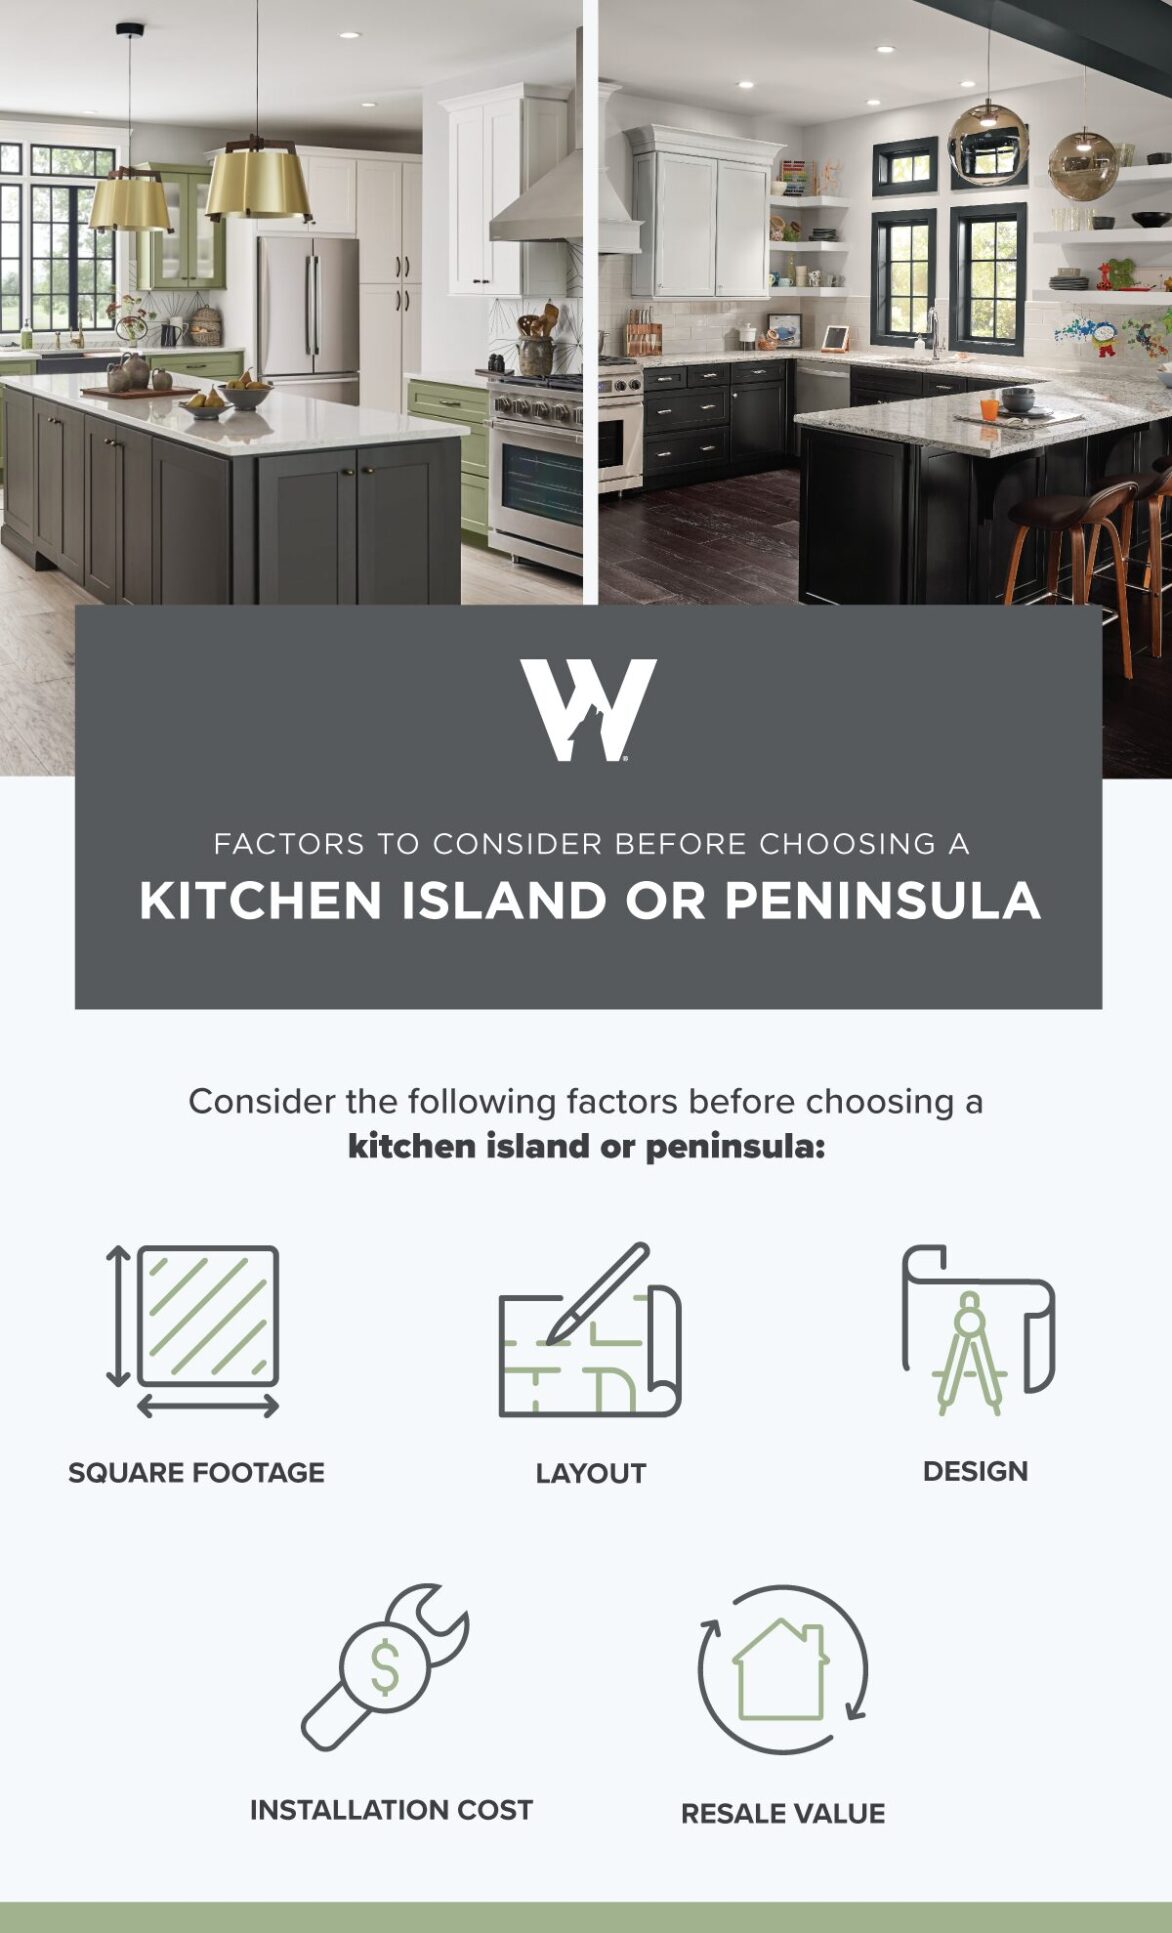 When choosing a kitchen island or peninsula, consider square footage, layout, design, installation cost, and resale value.